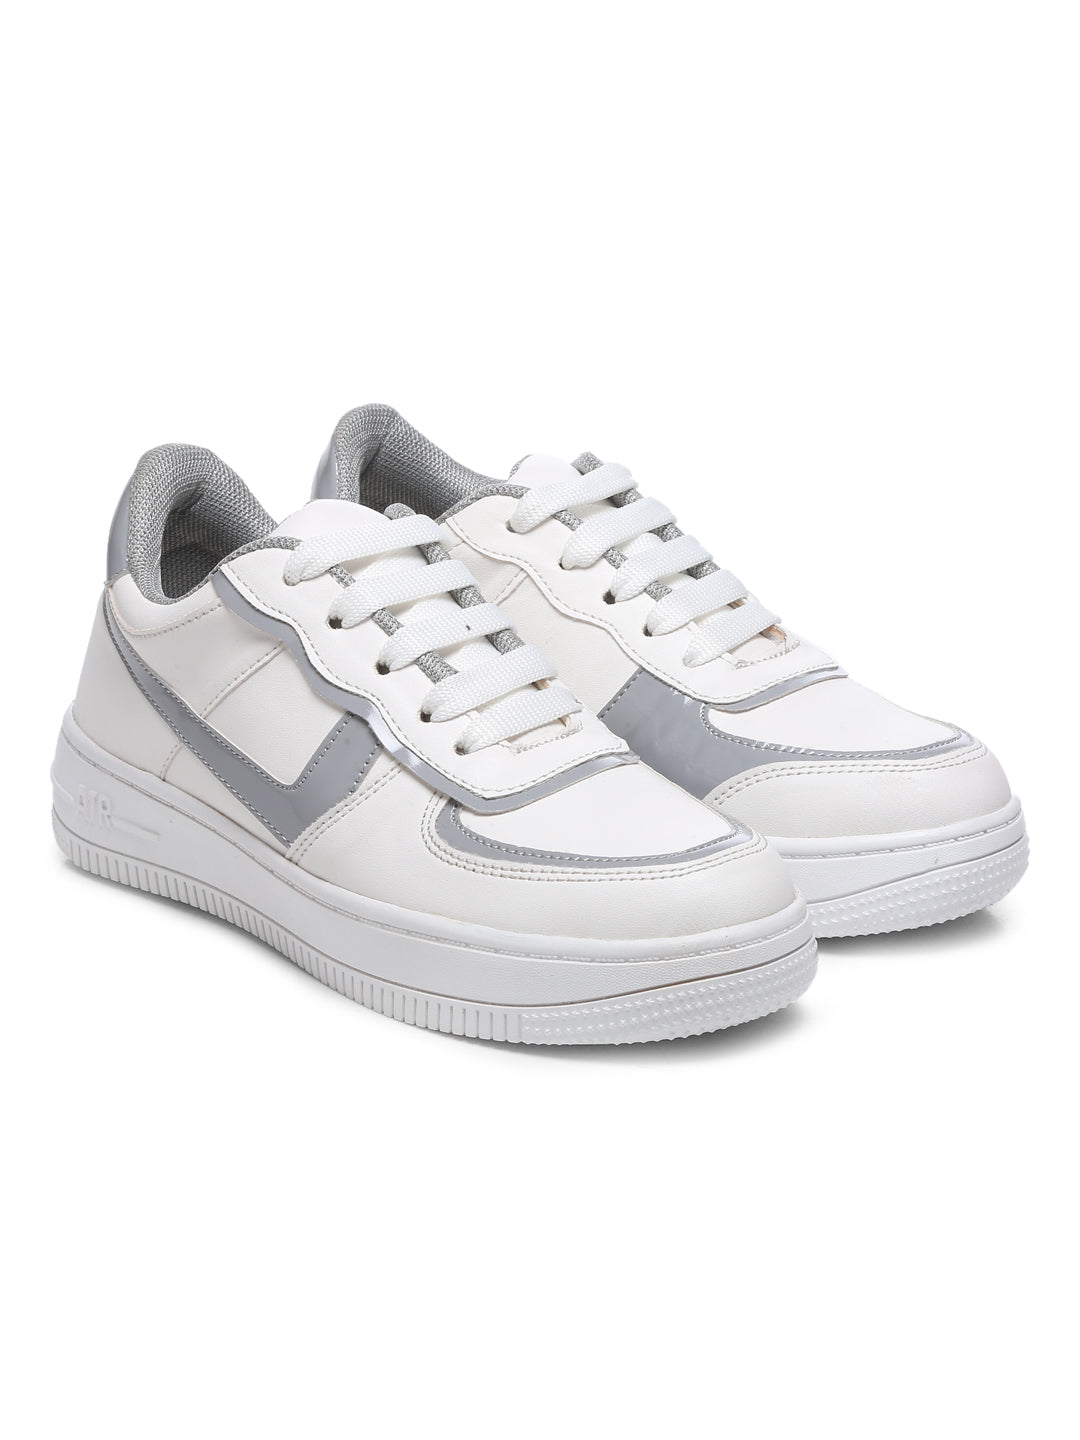 GNIST White Grey Colour Blocked Sneakers